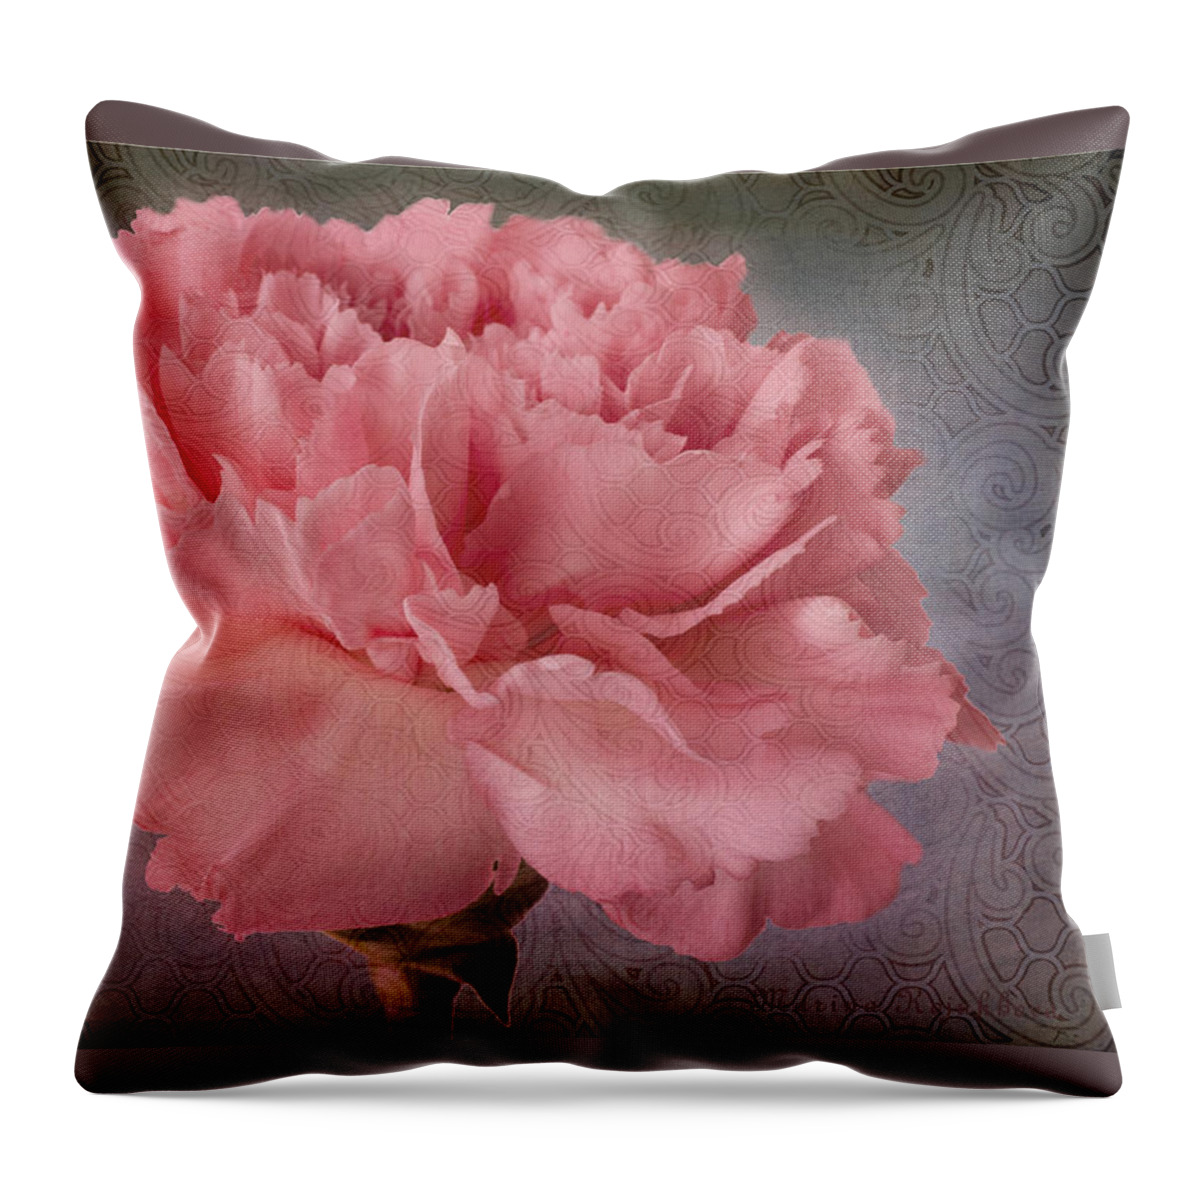 Pink Carnation Bloom Throw Pillow featuring the photograph Carnation Fascination by Marina Kojukhova